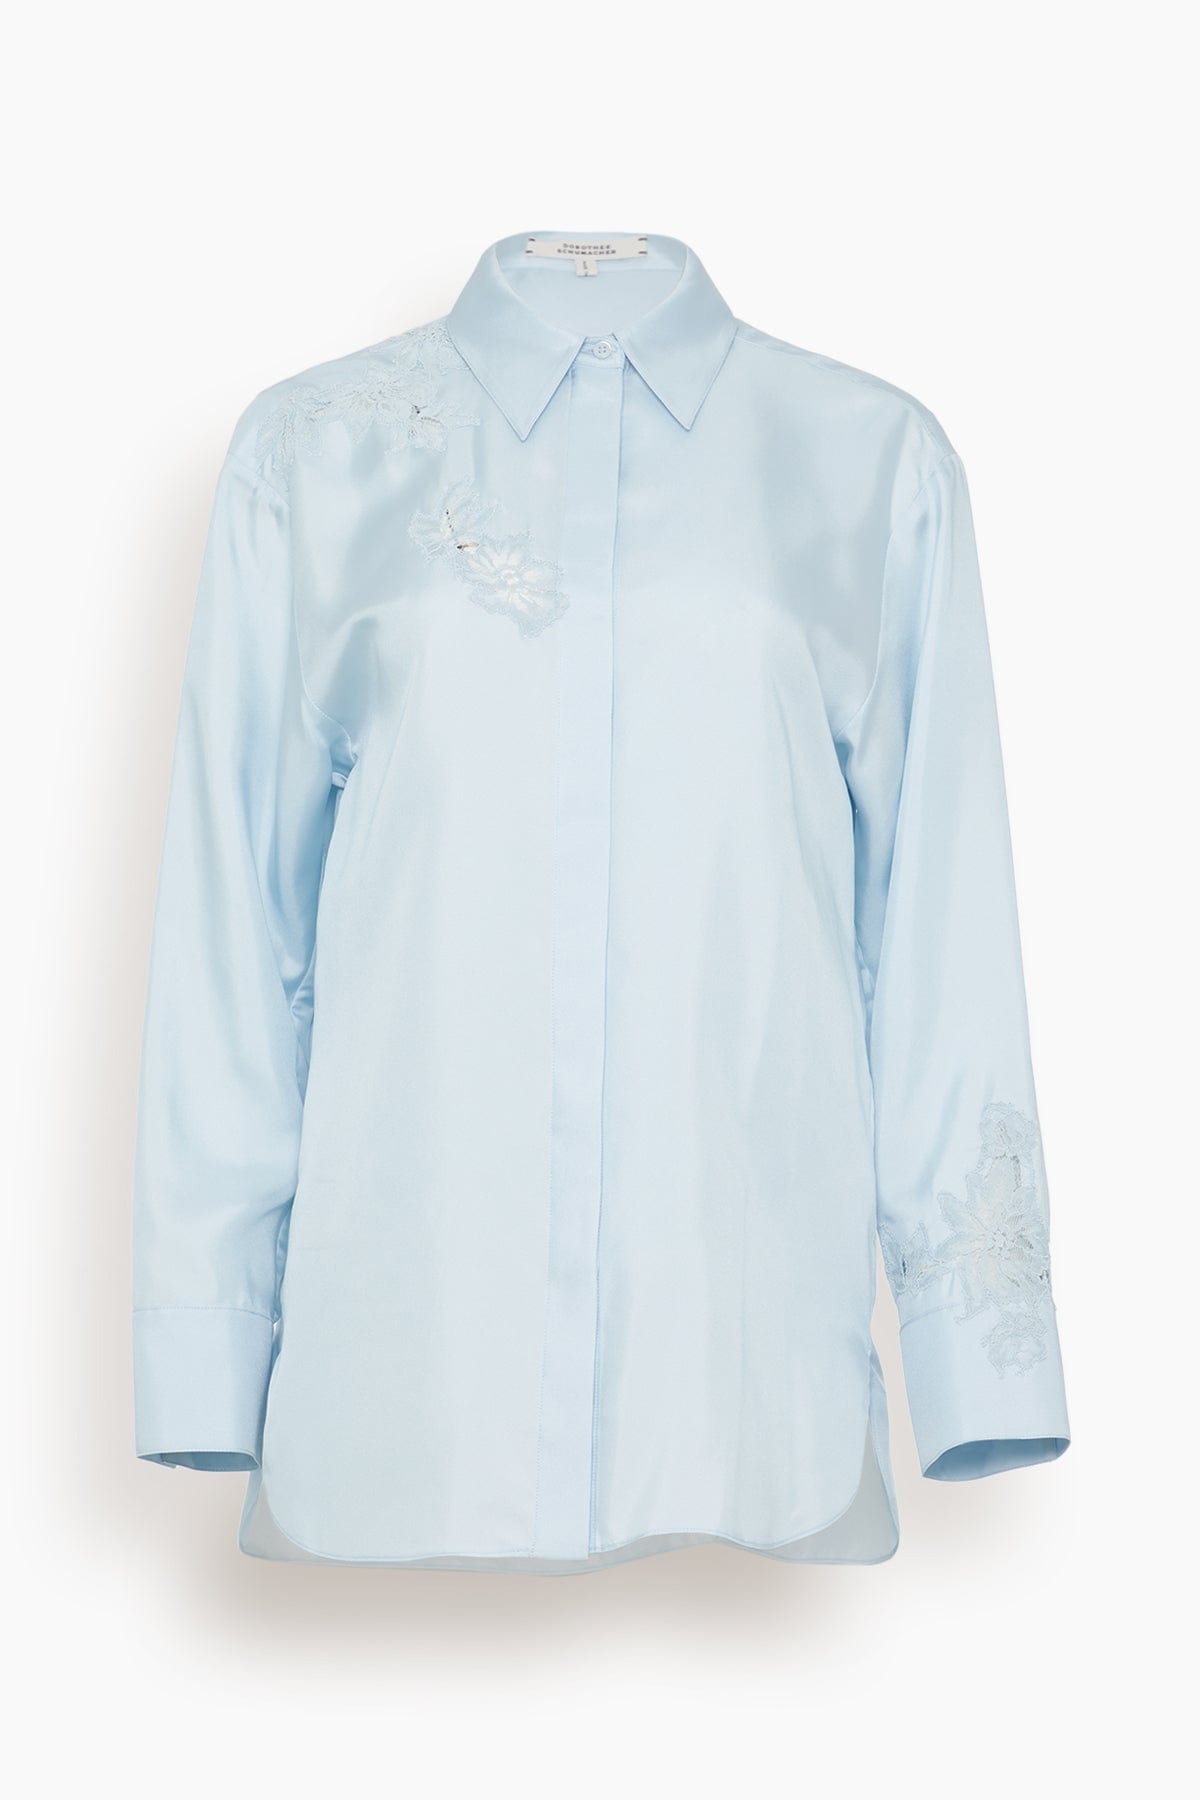 Sensual Coolness Blouse in Soft Blue - 1